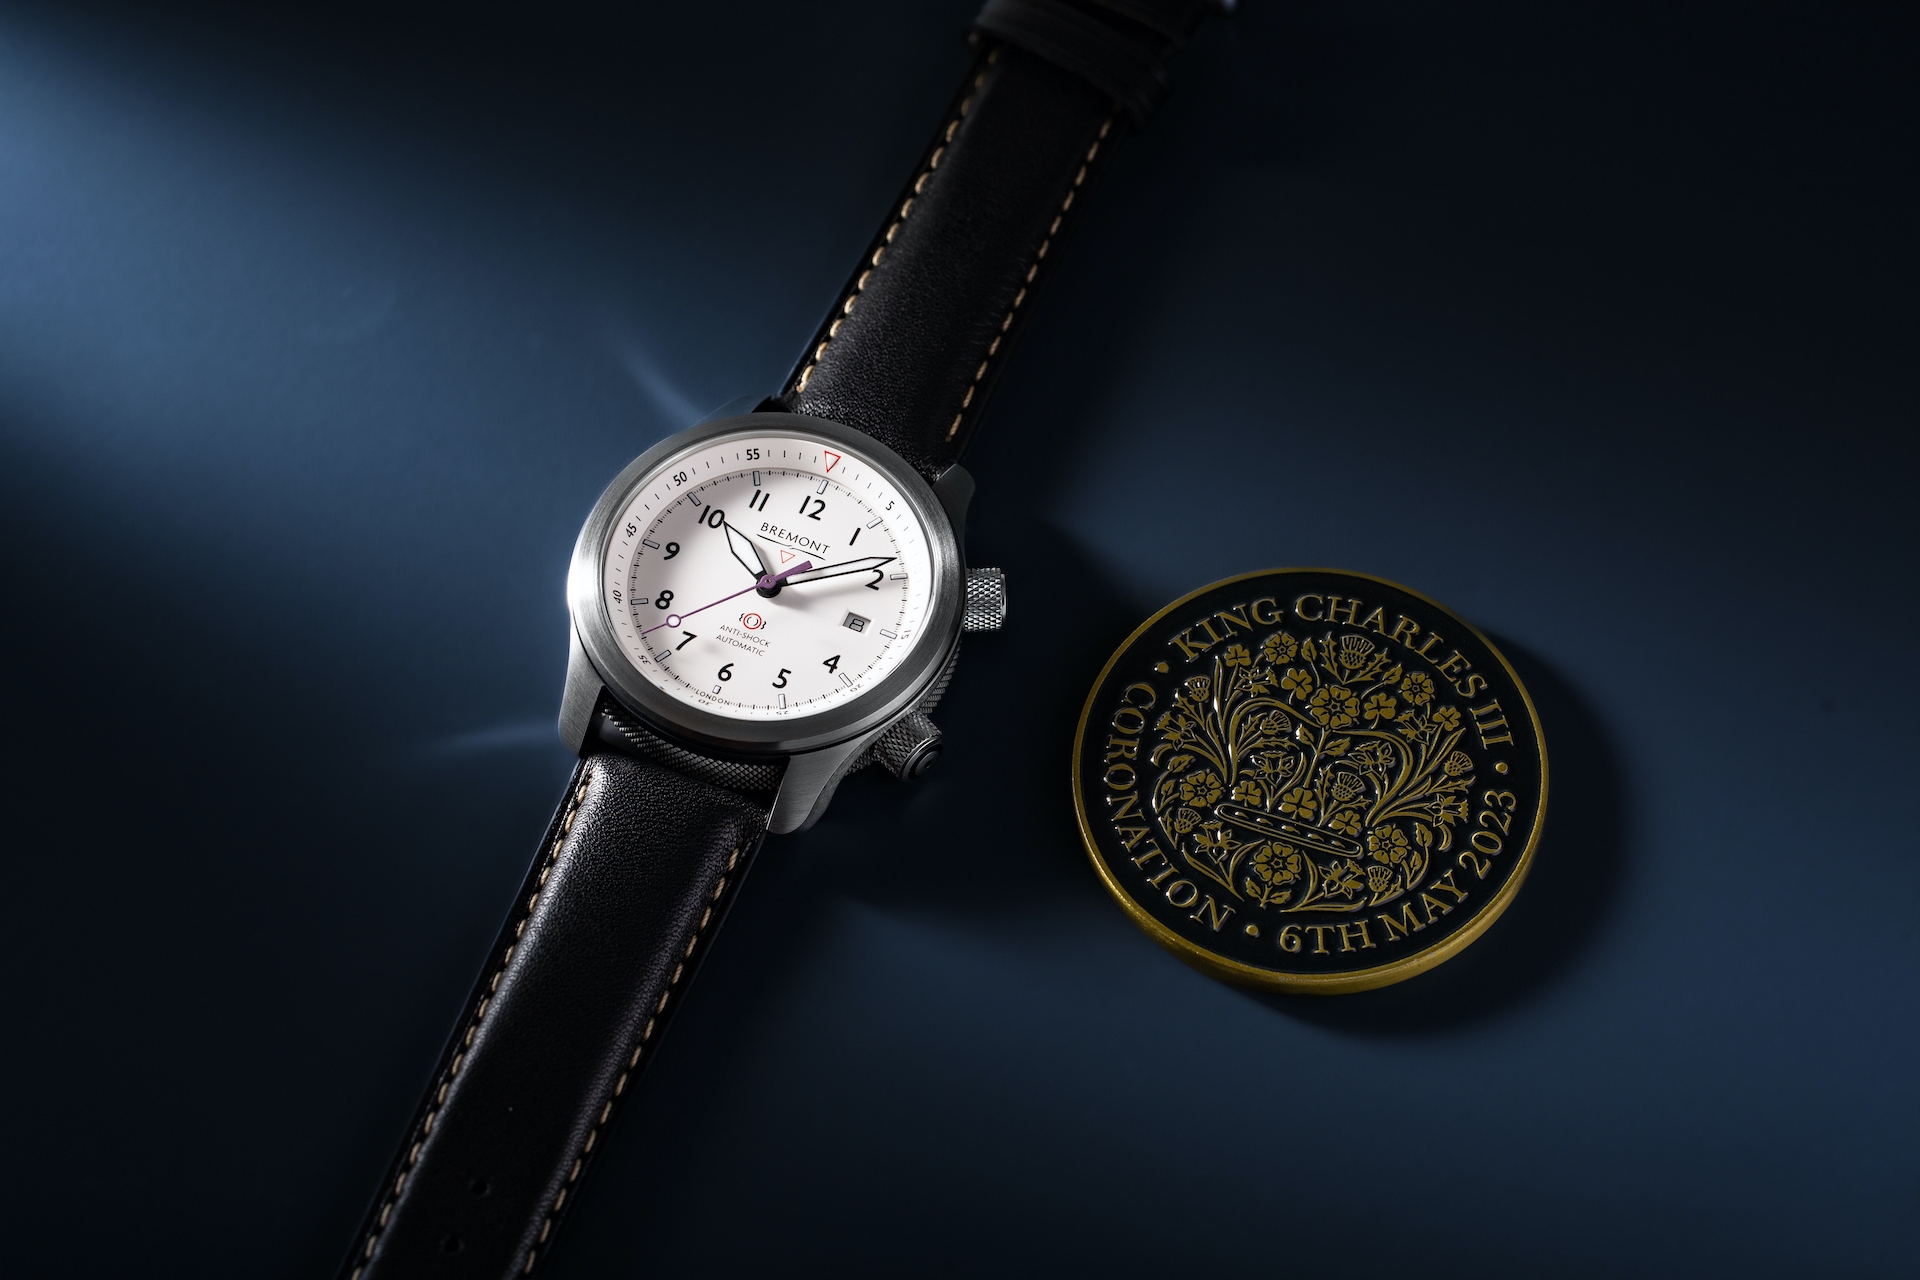 Bremont King Charles III watch and commemorative coin